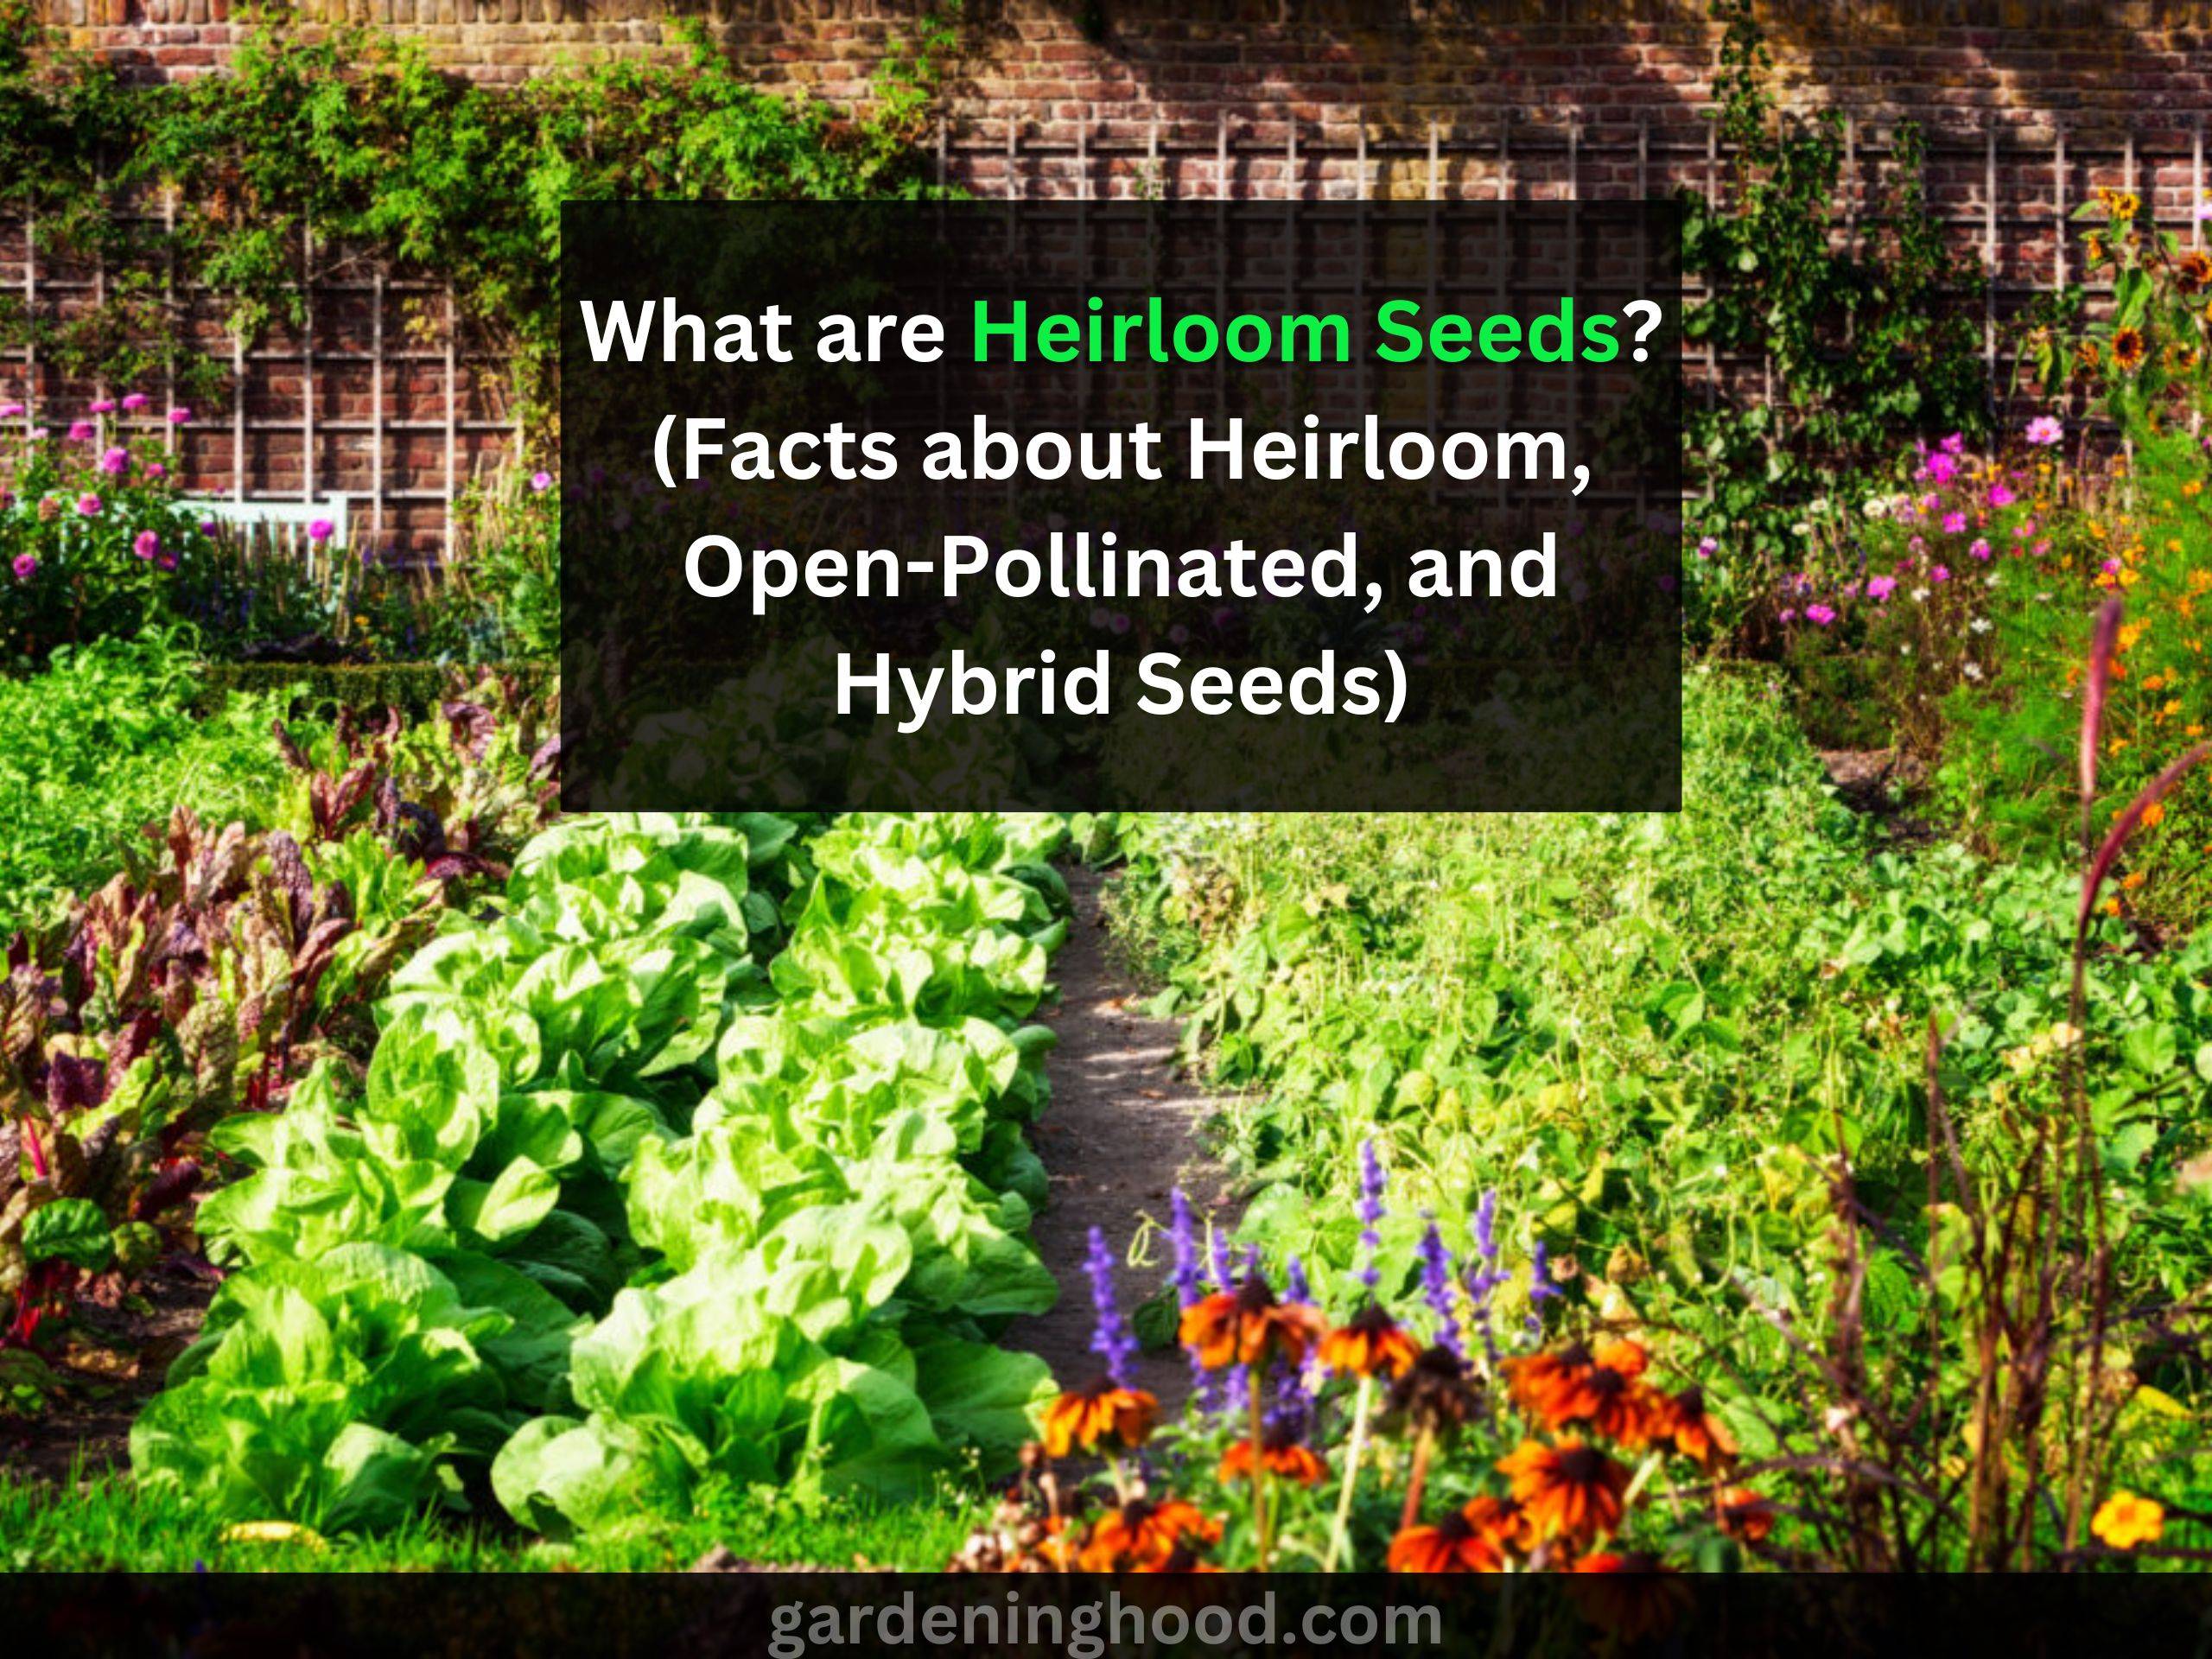 What are Heirloom Seeds?